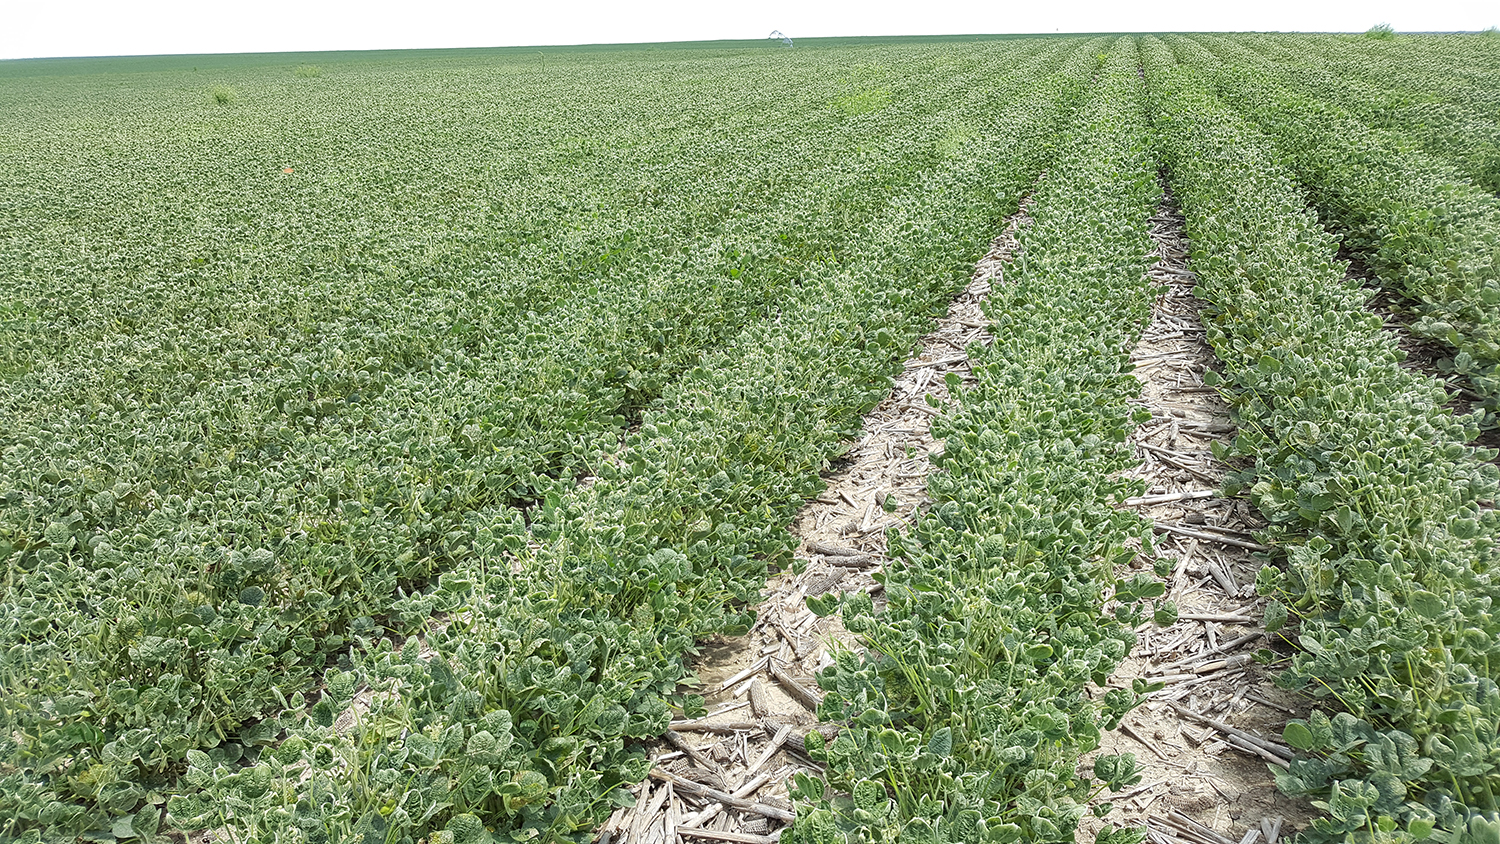 Soybean field injured by dicamba